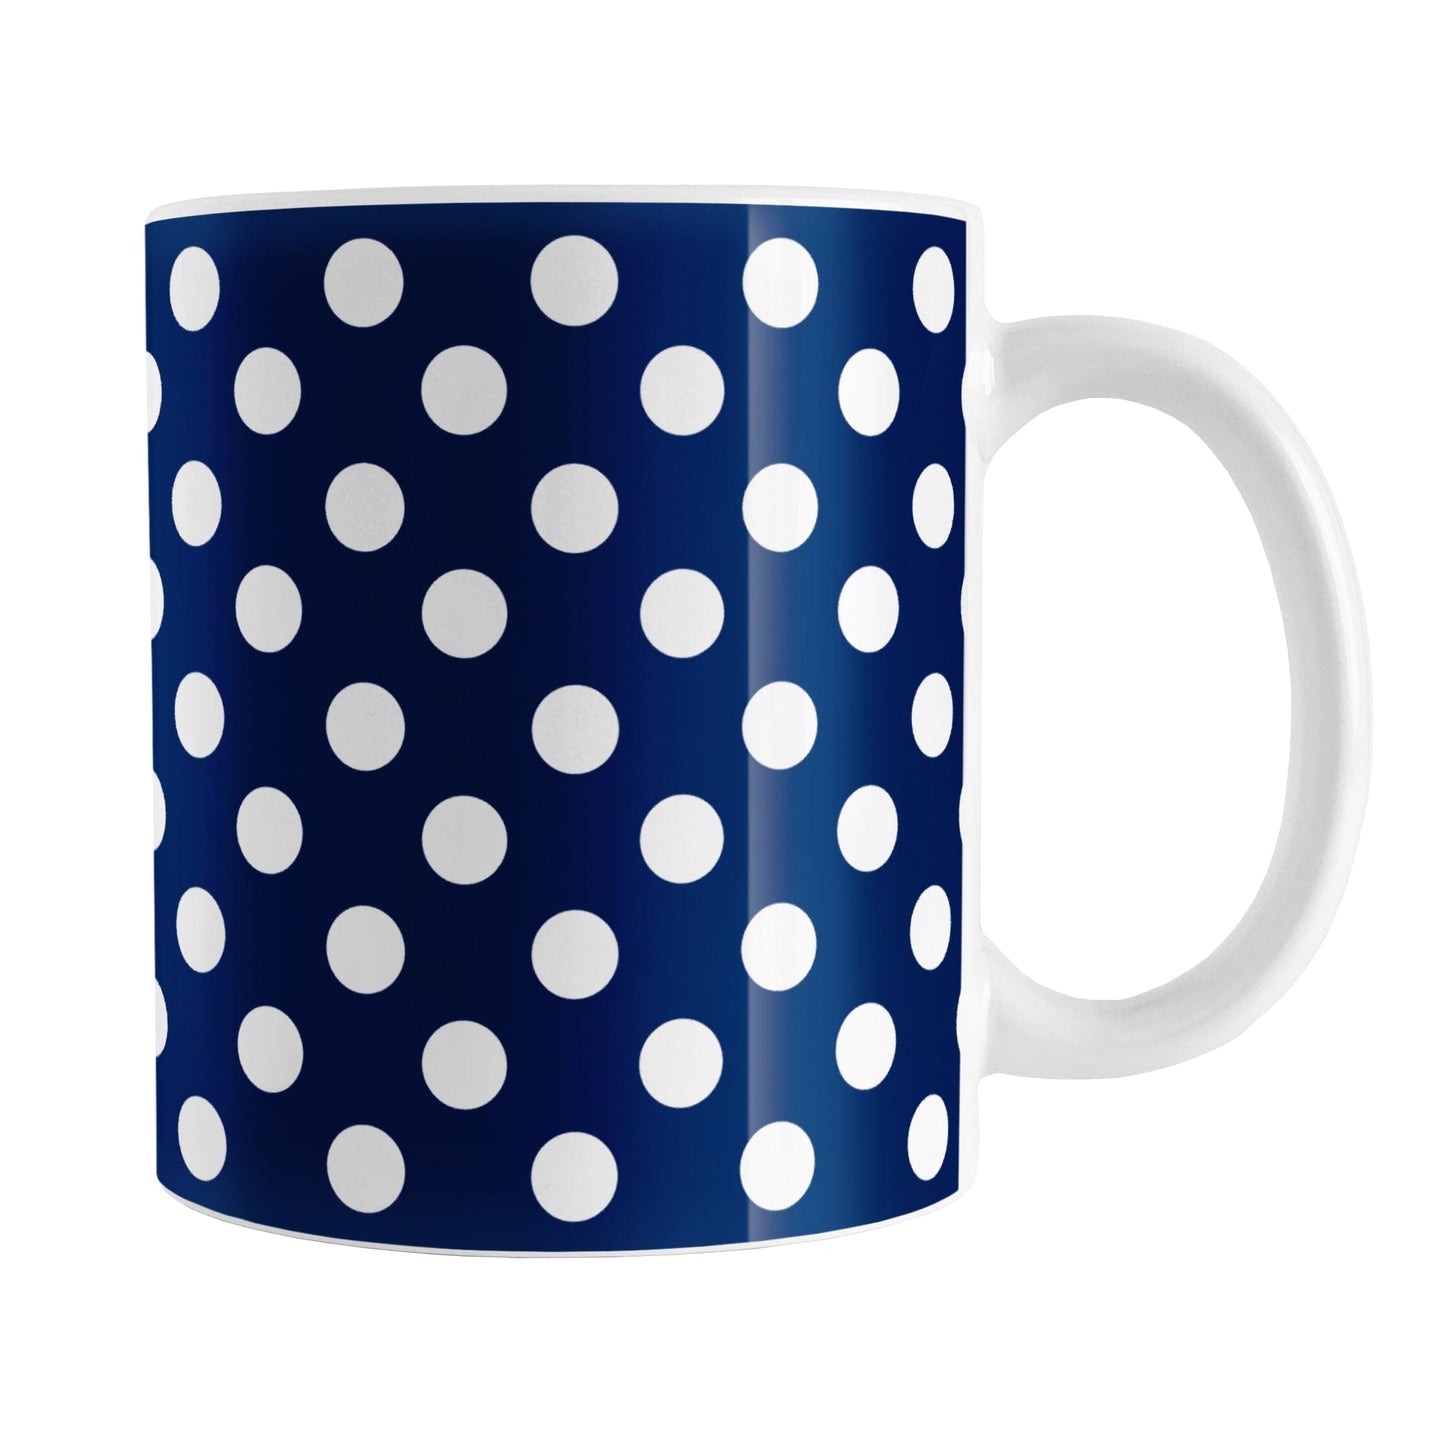 Dark Blue Polka Dot Mug (11oz) at Amy's Coffee Mugs.  A ceramic coffee mug designed with a dark blue polka dot pattern with white dots over a dark blue, close to a navy blue, background color. This polka dotted pattern wraps around the mug to the handle. 